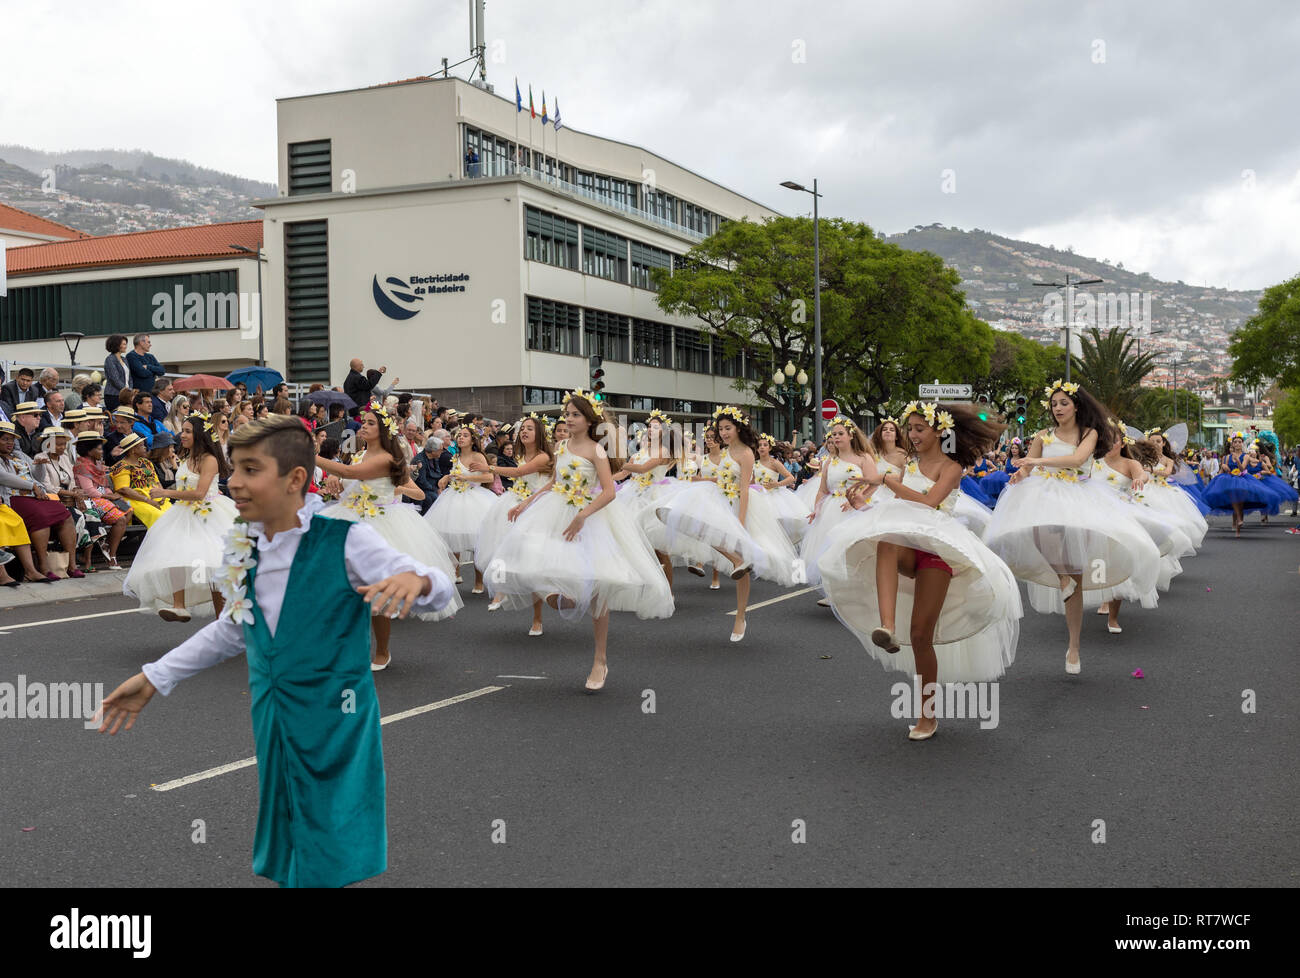 Funchal; Madeira; Portugal - April 22; 2018: A group of girls in colorful costumes are dancing at Madeira Flower Festival Parade in Funchal on the Isl Stock Photo